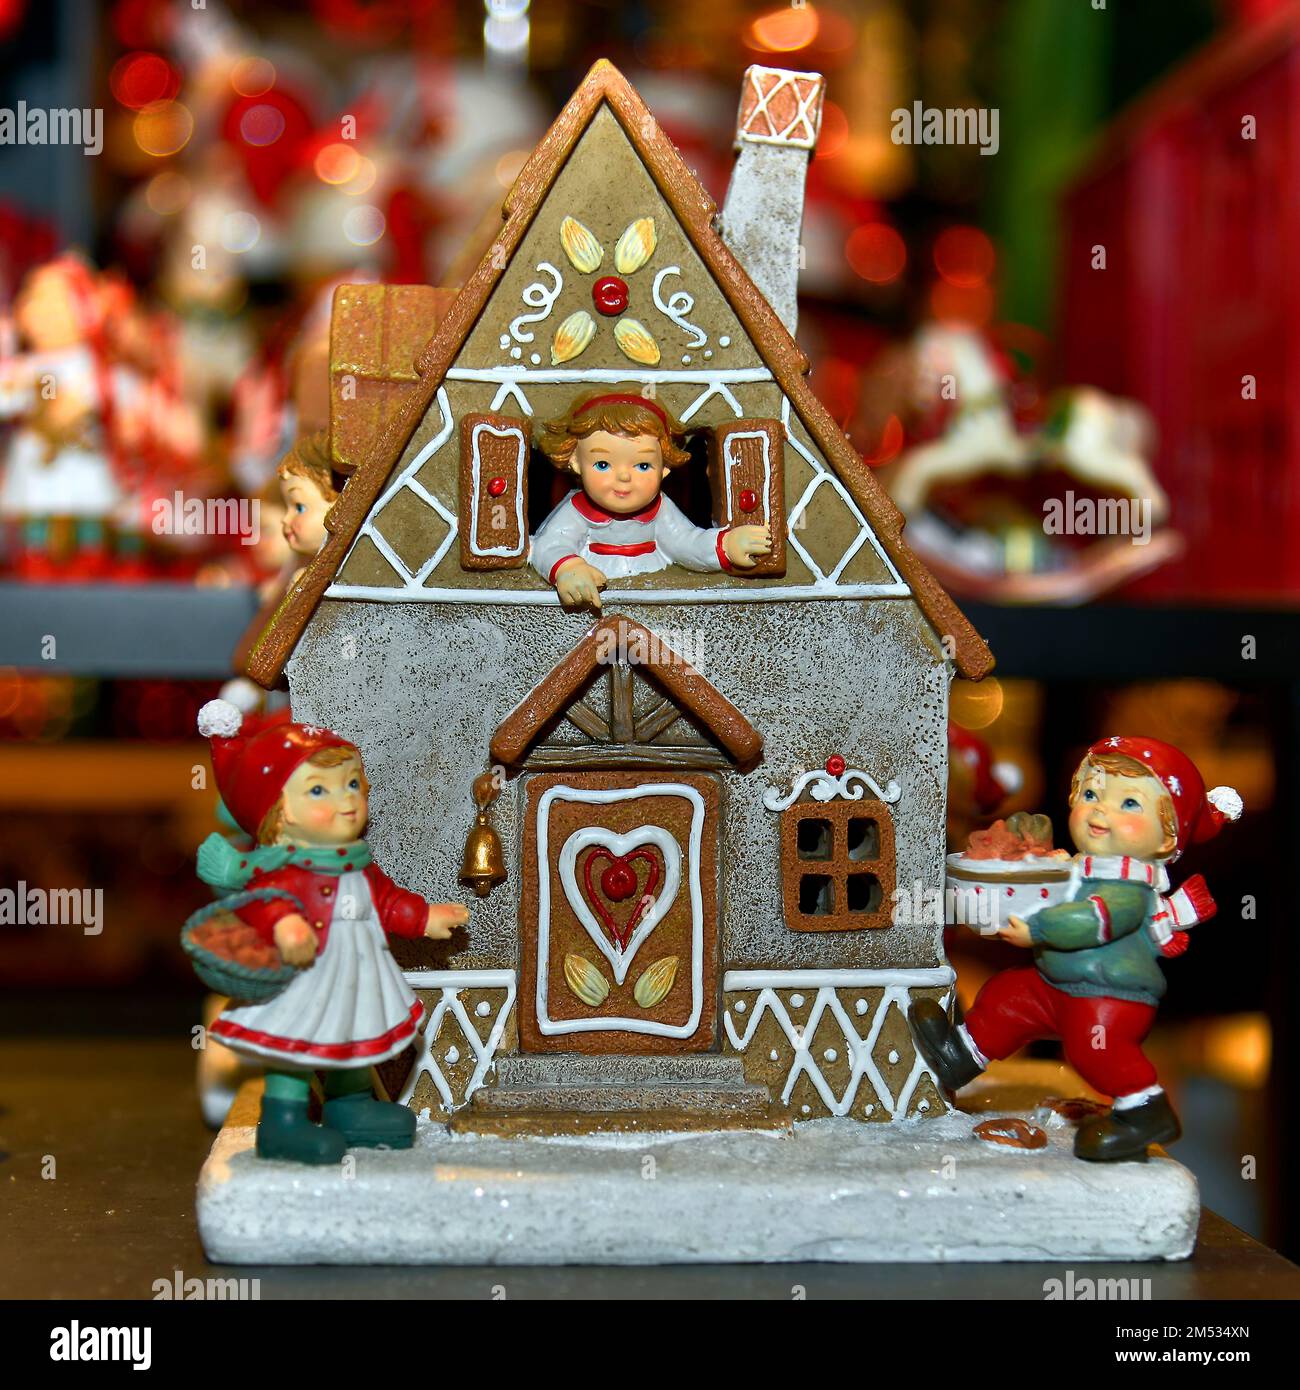 Cute decorative New Year's house with toy characters for the winter holidays Stock Photo